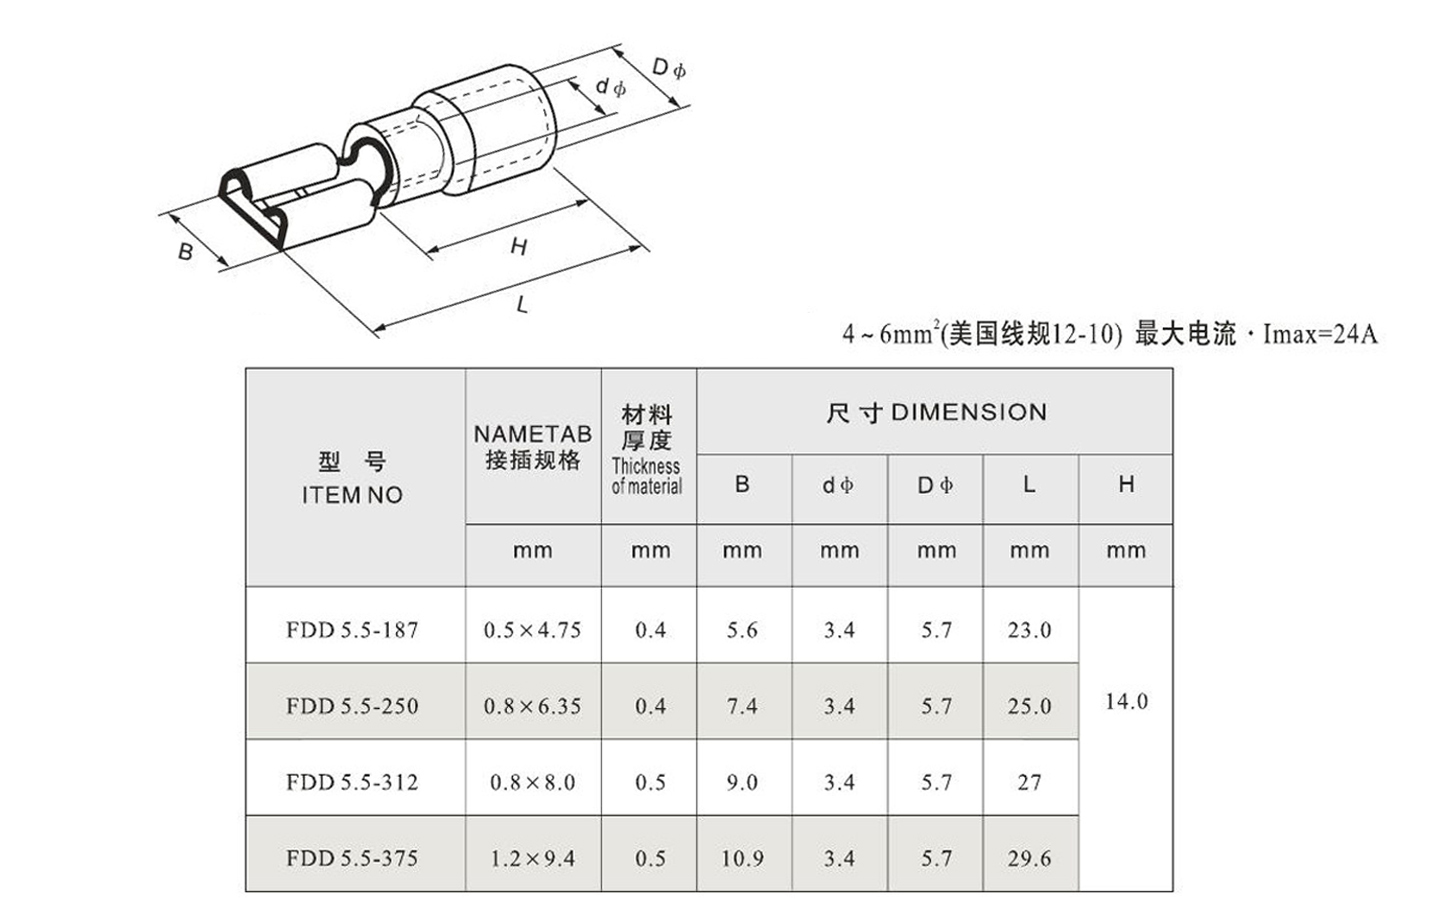 Female insulated electrical cold-pressed crimp terminal FDD5.5-250 AWG 12-10 4.0-6.0mm2 2